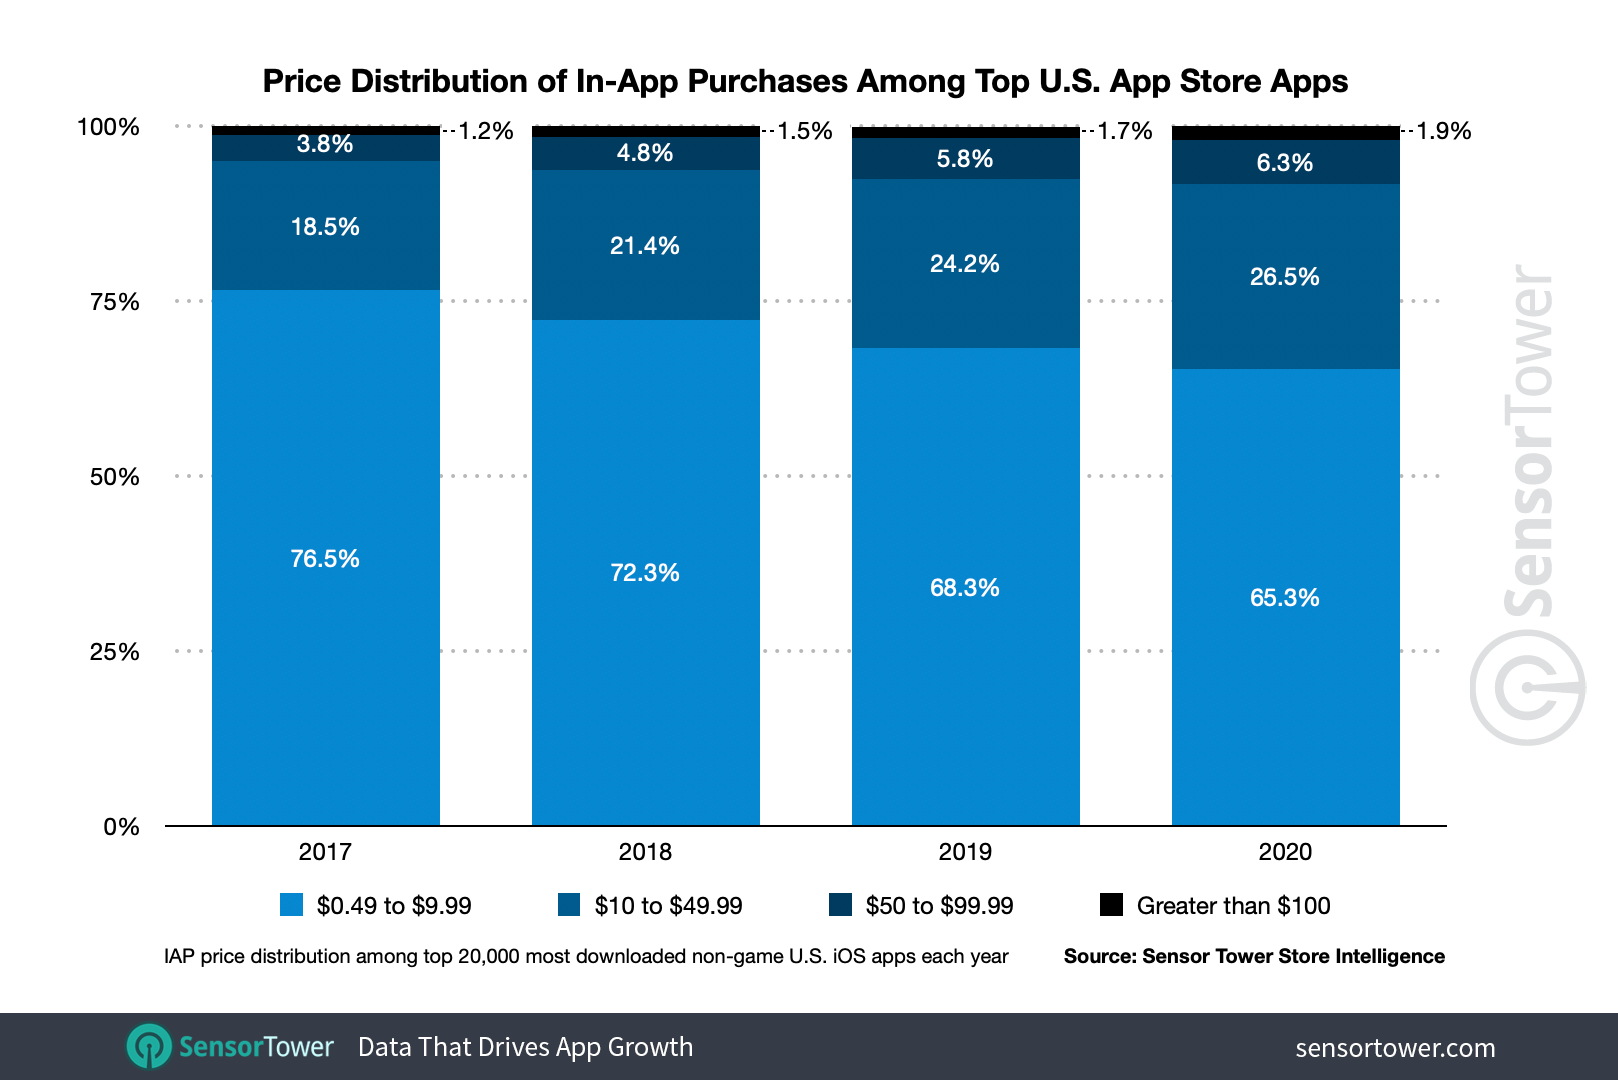 The majority of in-app purchases in the top U.S. App Store apps are still below $10, but the next price bracket up is gaining ground